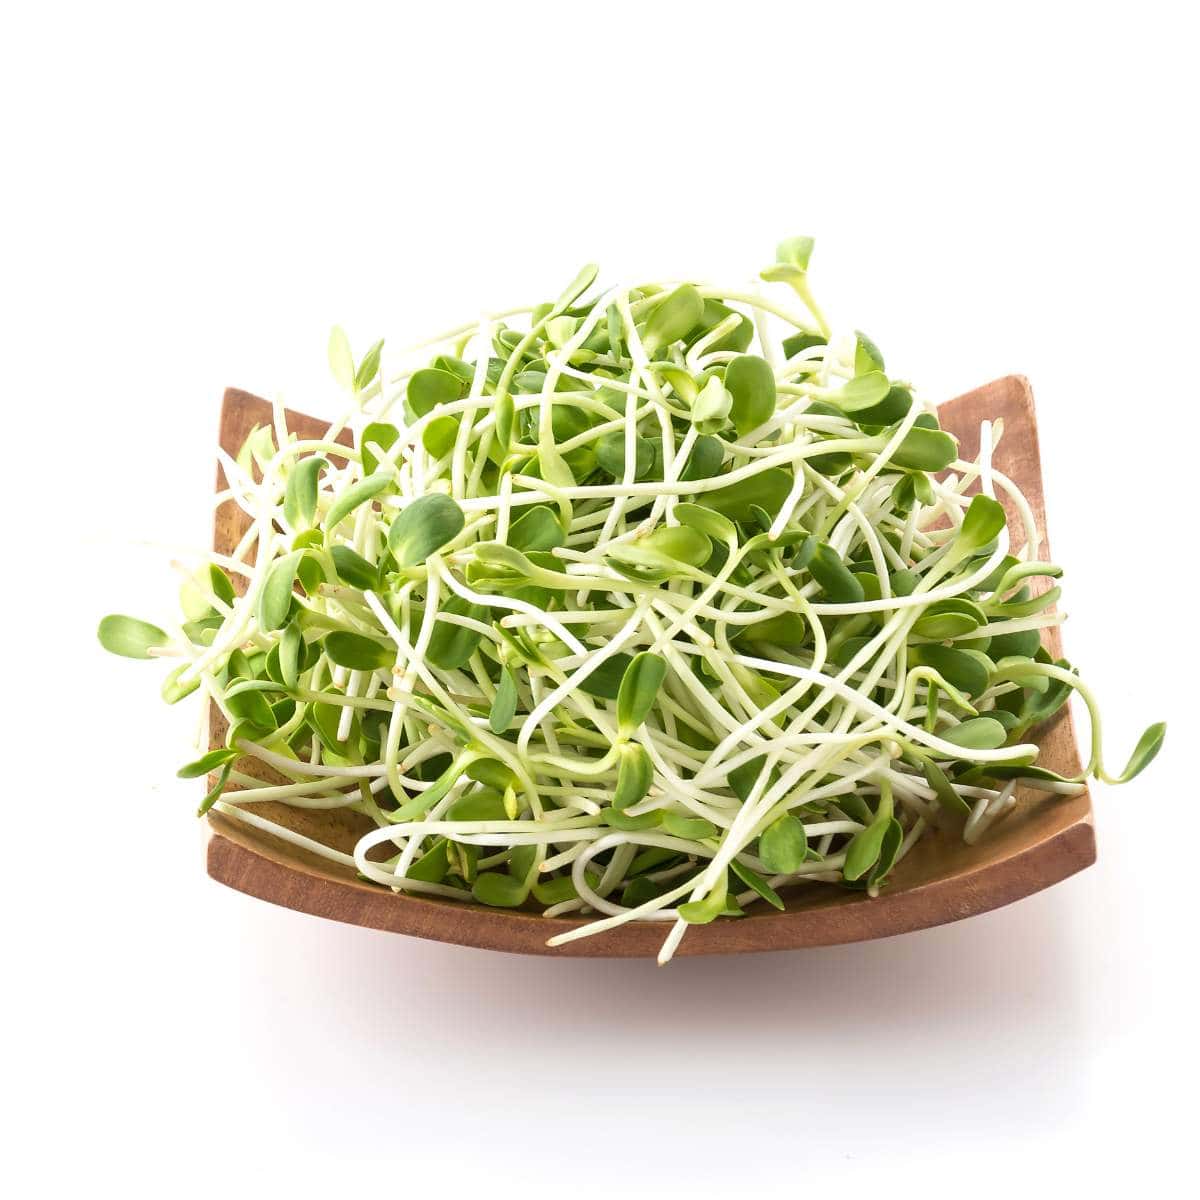 Instructions for eating sprouts in a wooden bowl on a white background.